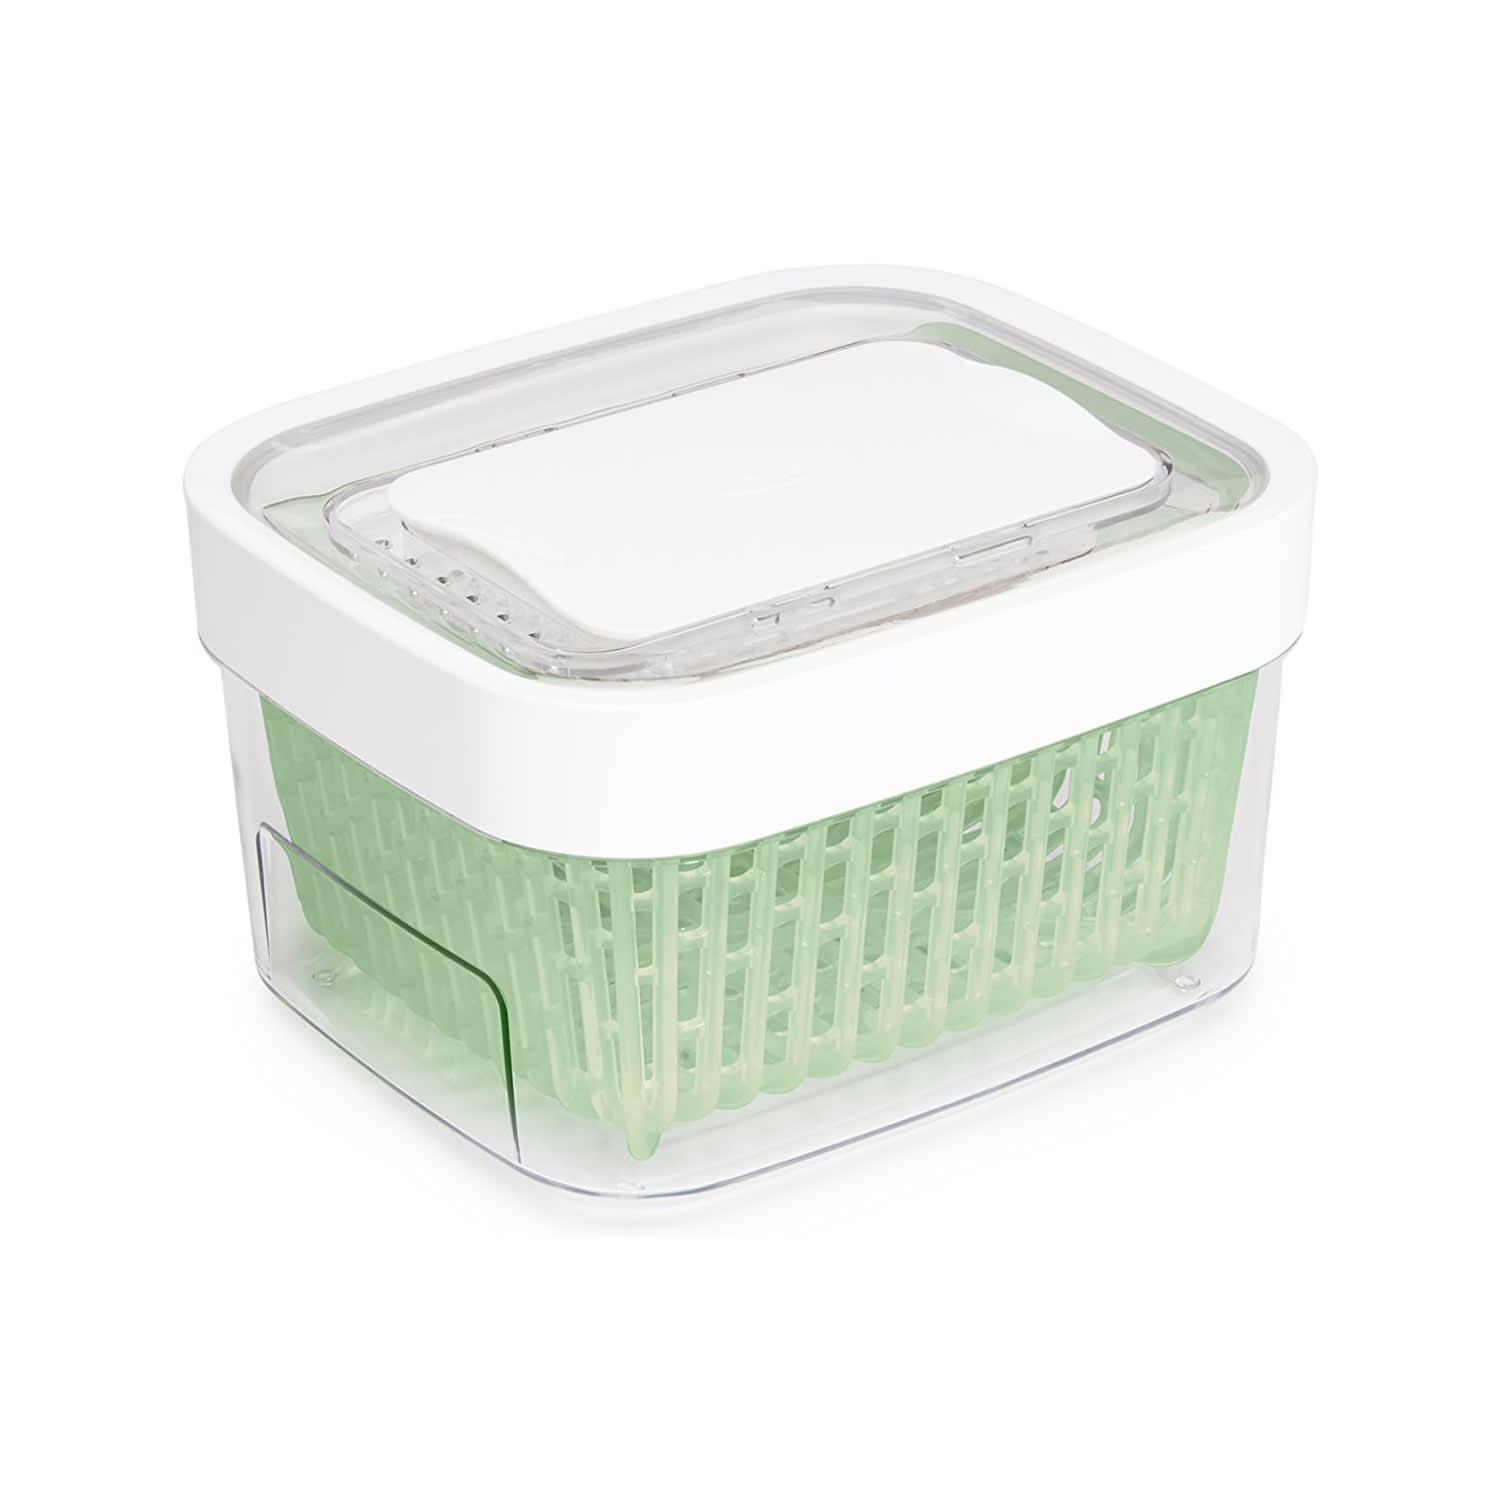 OXO Good Grips Storage Container Review 2023